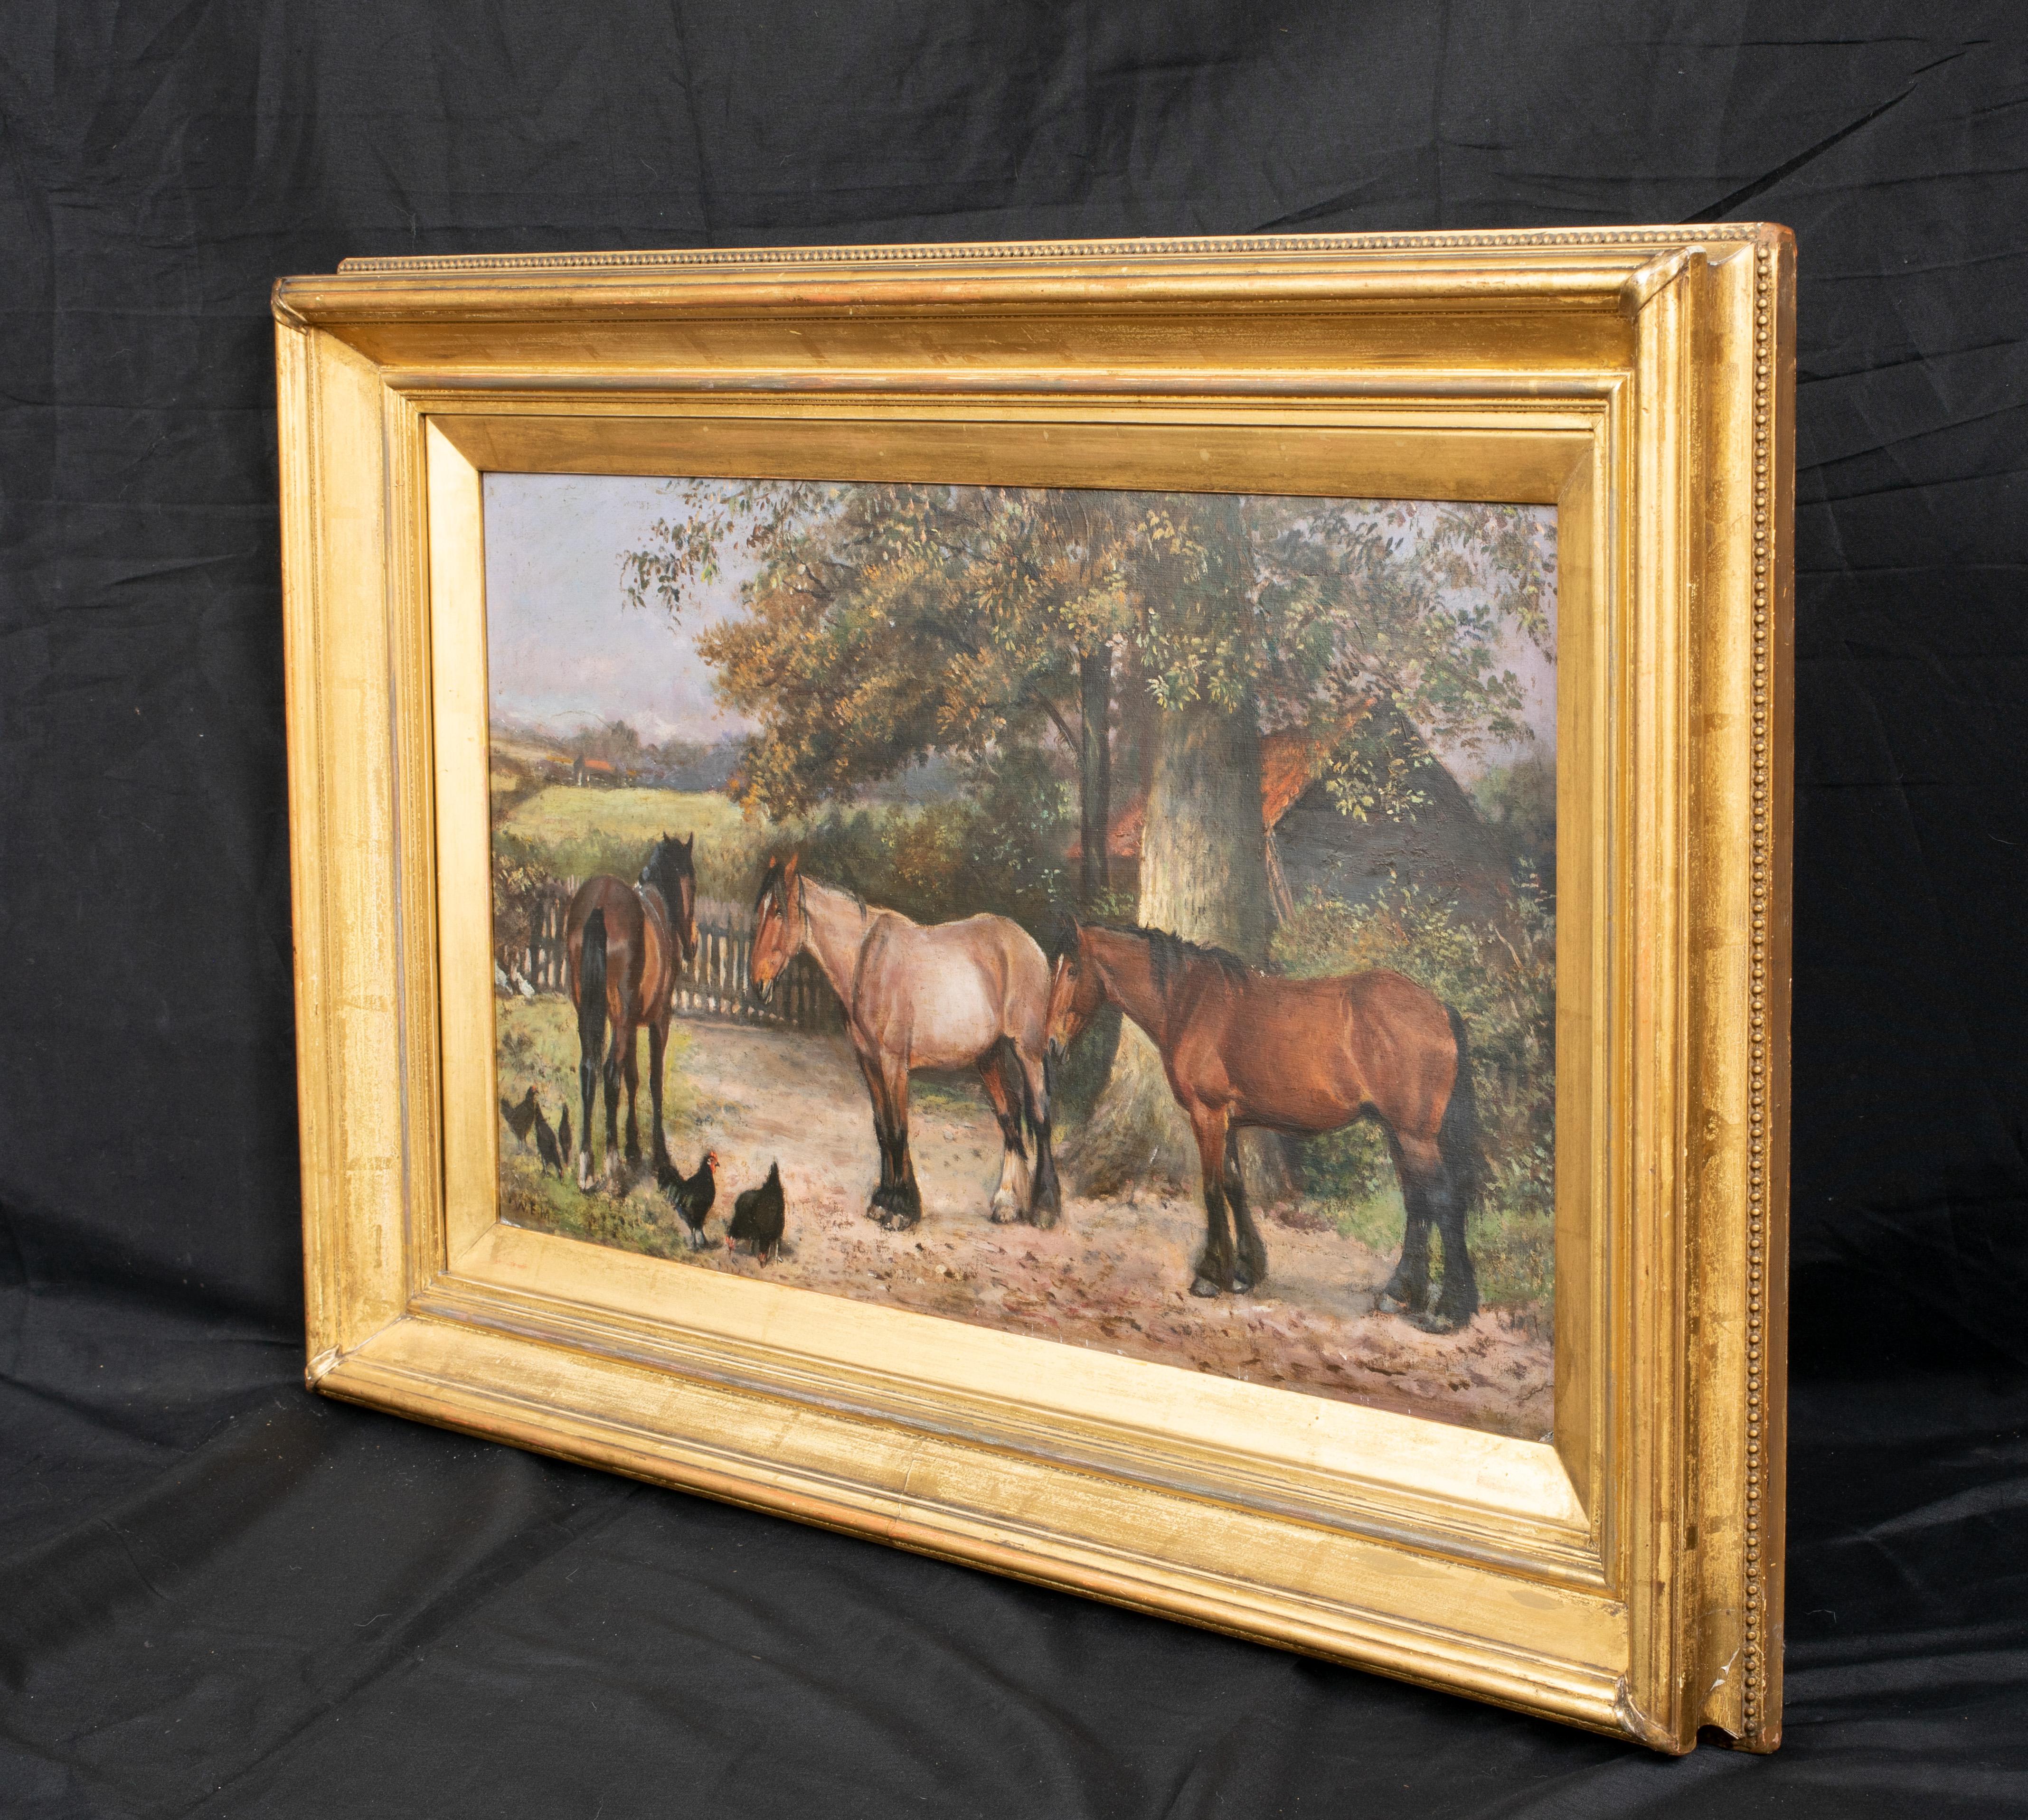 A Days Rest, 19th century 

by William Edward Millner (1849-1891)

Fine Large 19th Century English scene of draught horses resting in the yard, oil Lon canvas by William Edward Millner. Excellent quality and condition rare early depiction of draught